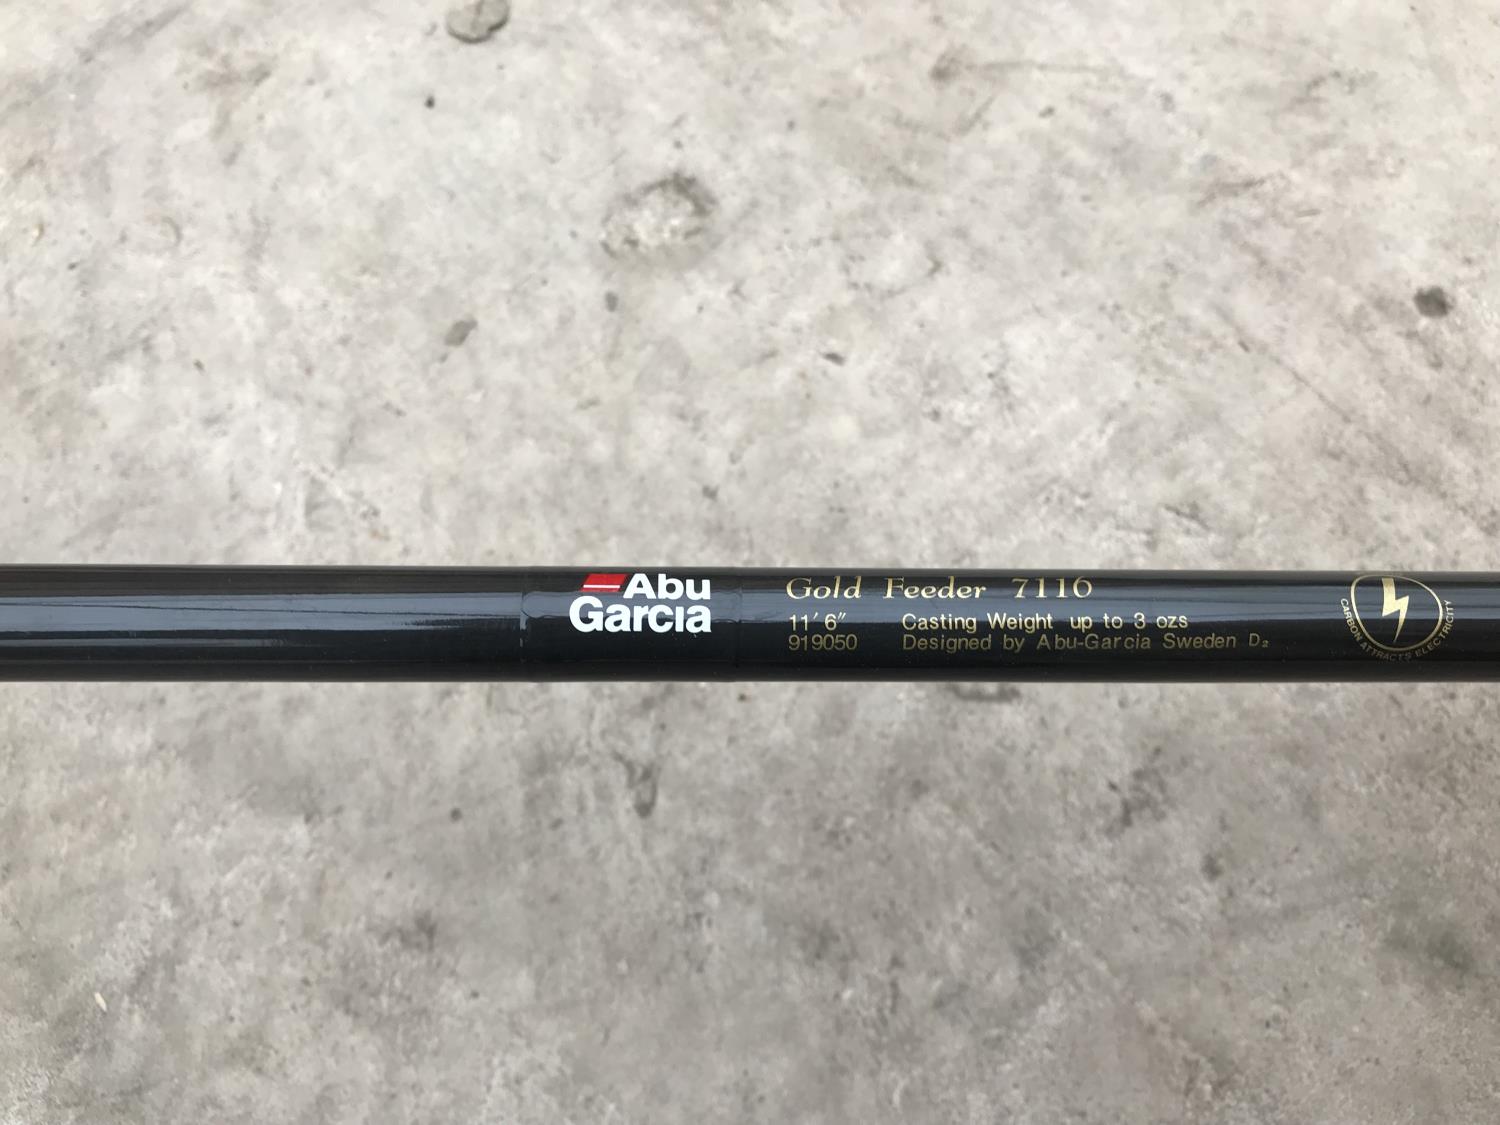 AN AS NEW ABU GARCIA GOLD 7110 11' 6" FEEDER ROD AND ROD BAG - Image 2 of 2